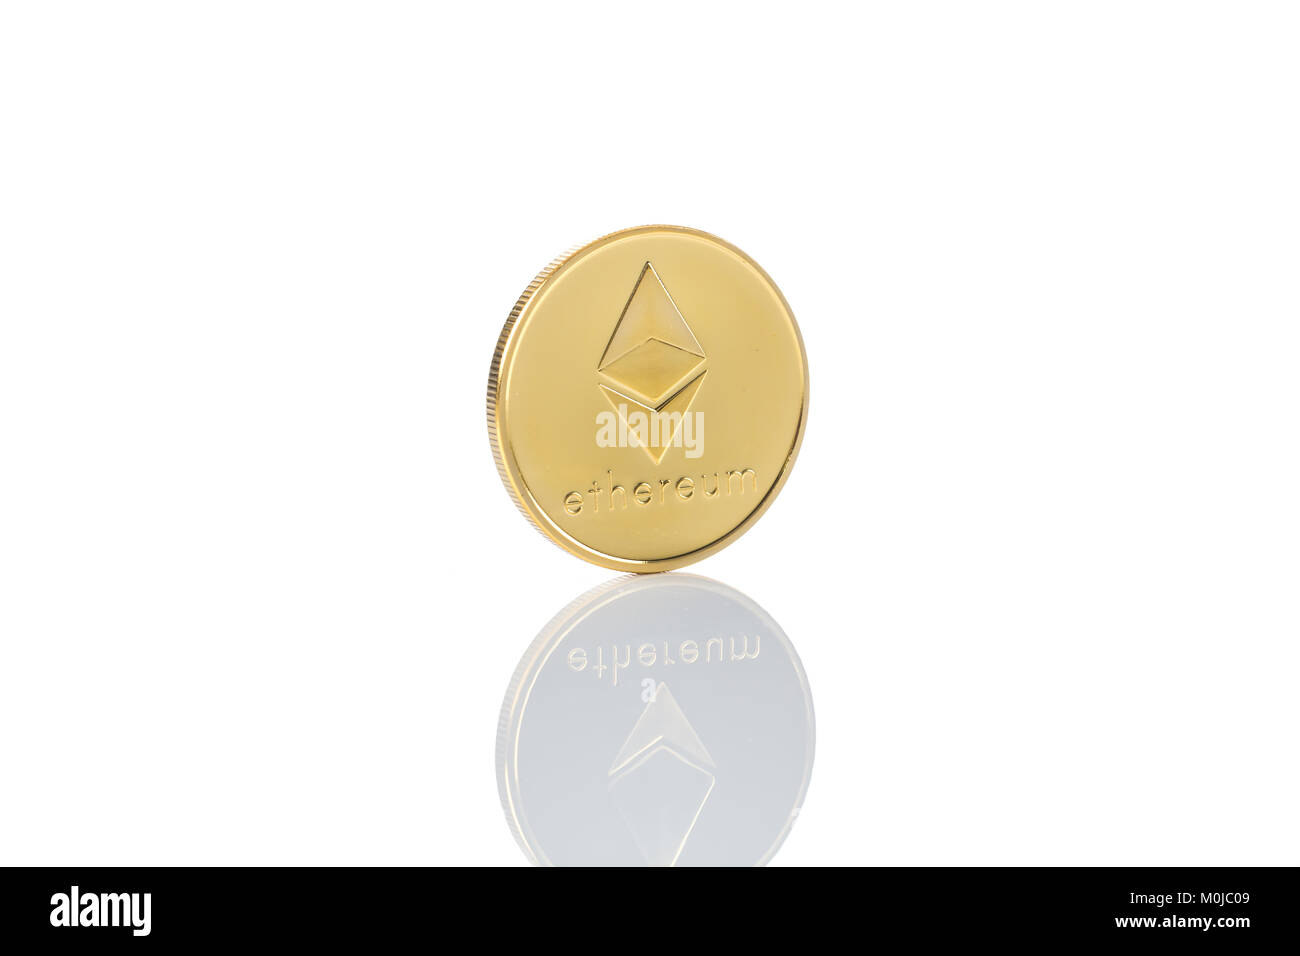 ethereum classic coin isolated on white background Stock Photo